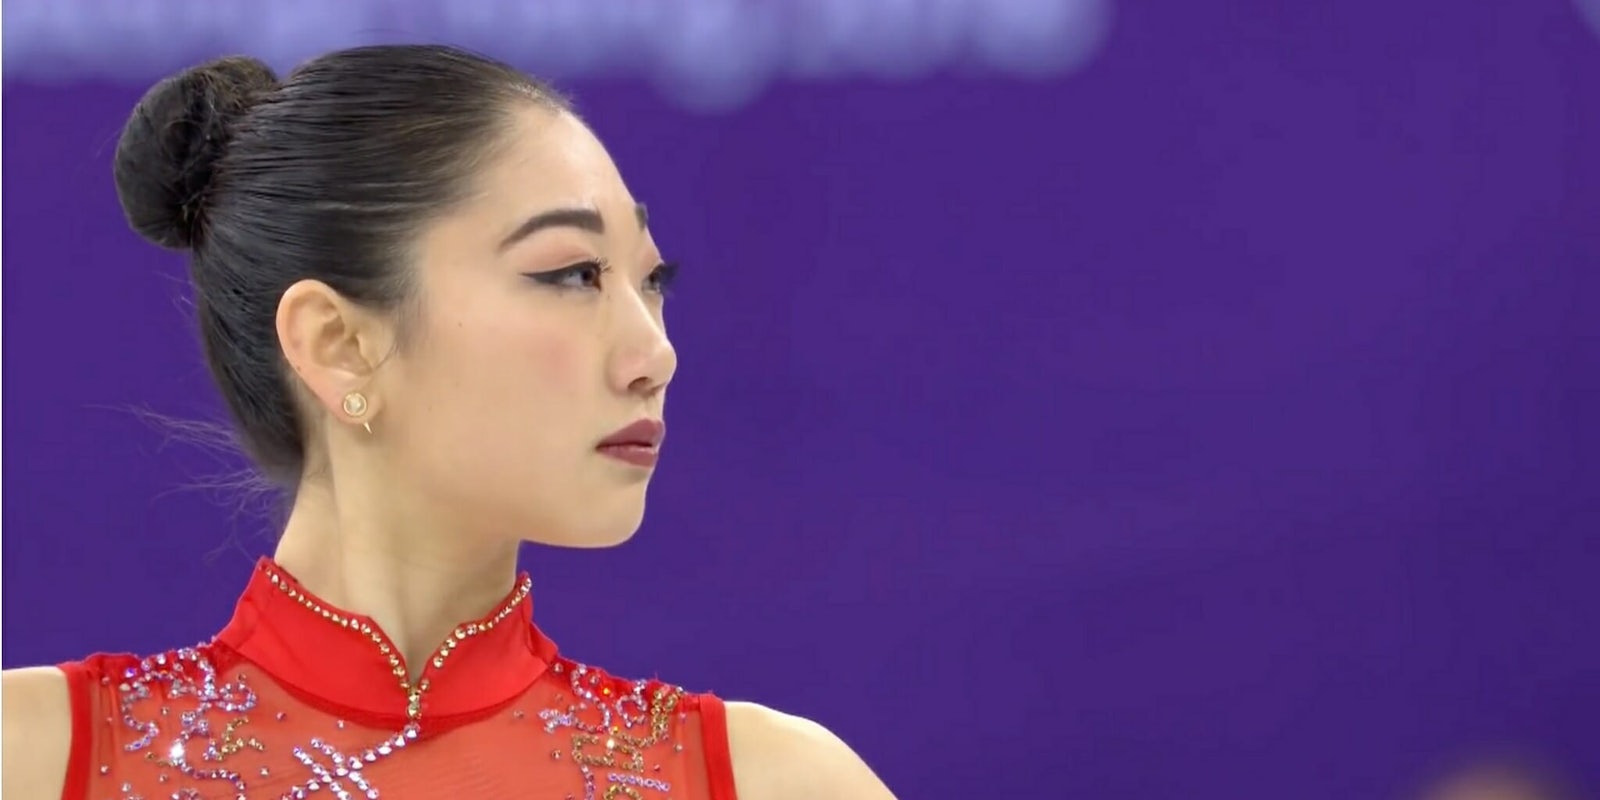 Figure skater Mirai Nagasu just became the first American woman to land the triple axel at the Winter Olympics